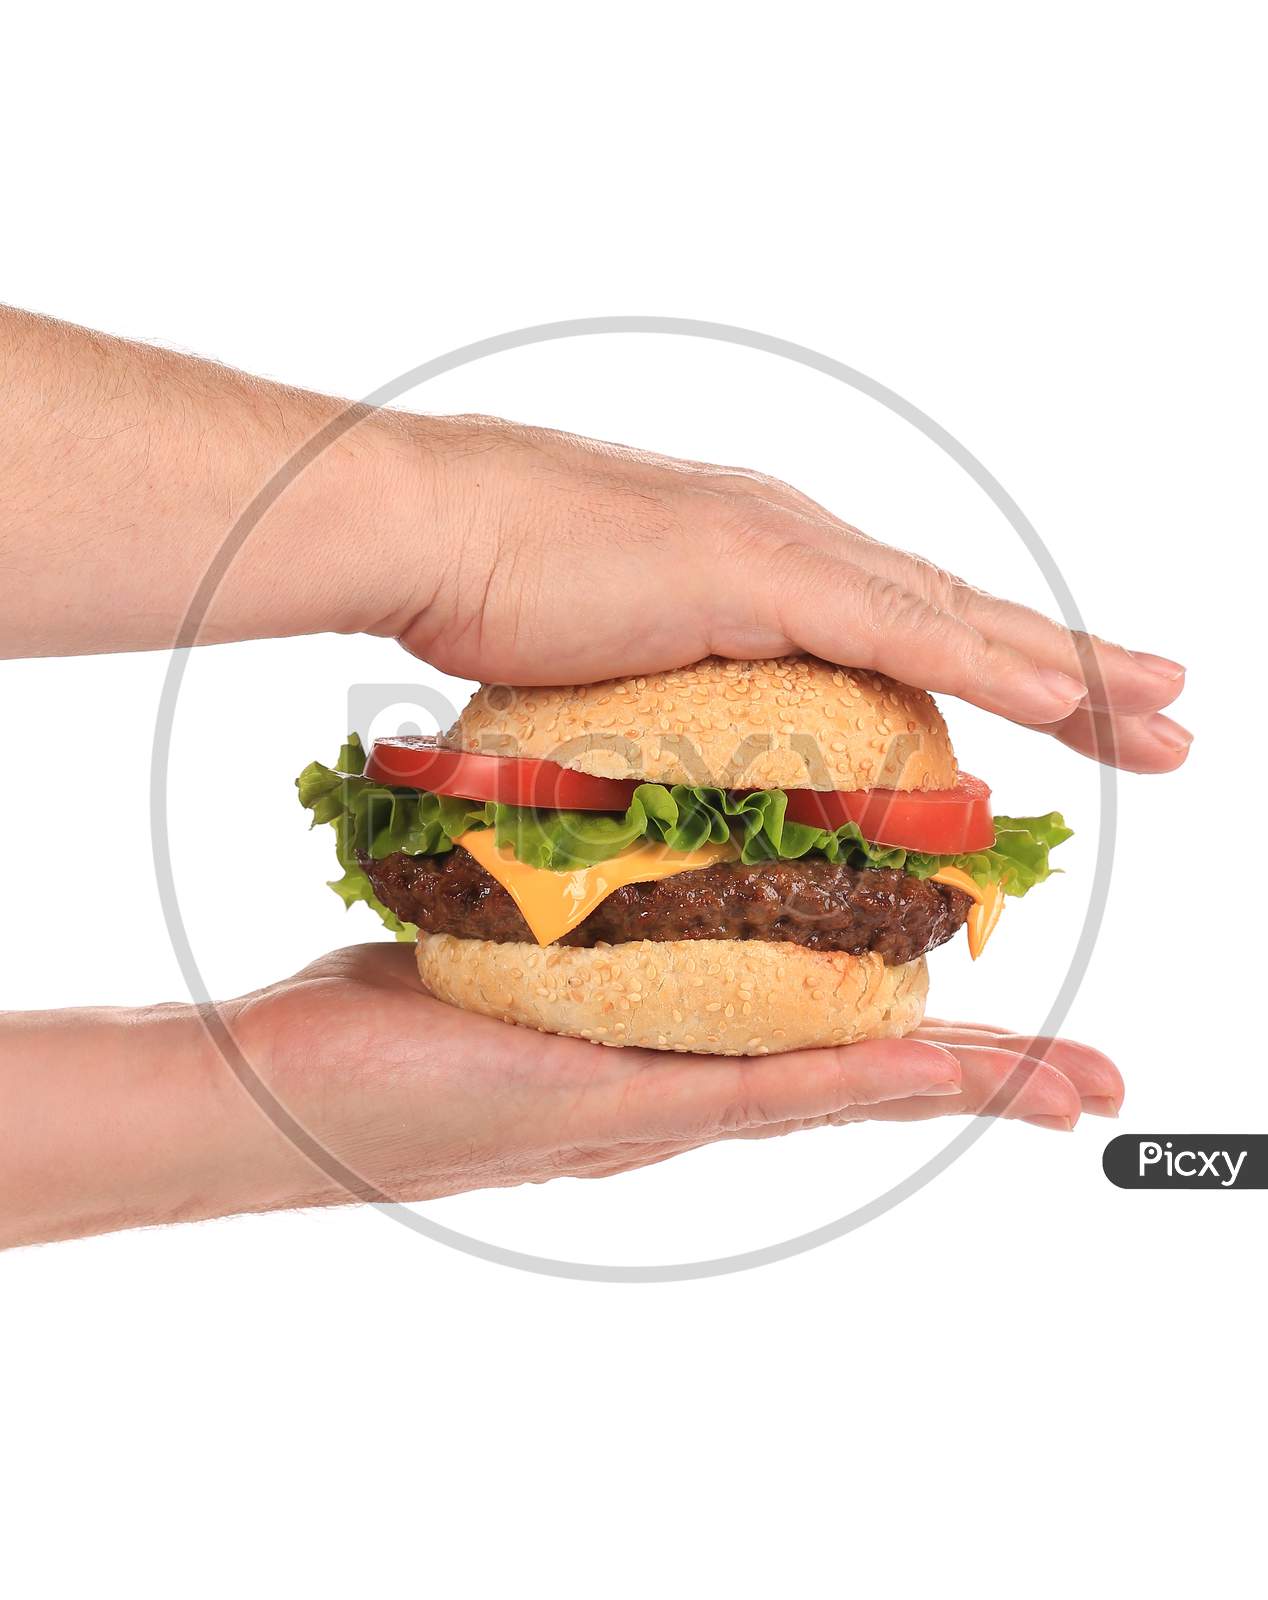 Sandwich In Middle Of Two Hands. Isolated On A White Background.